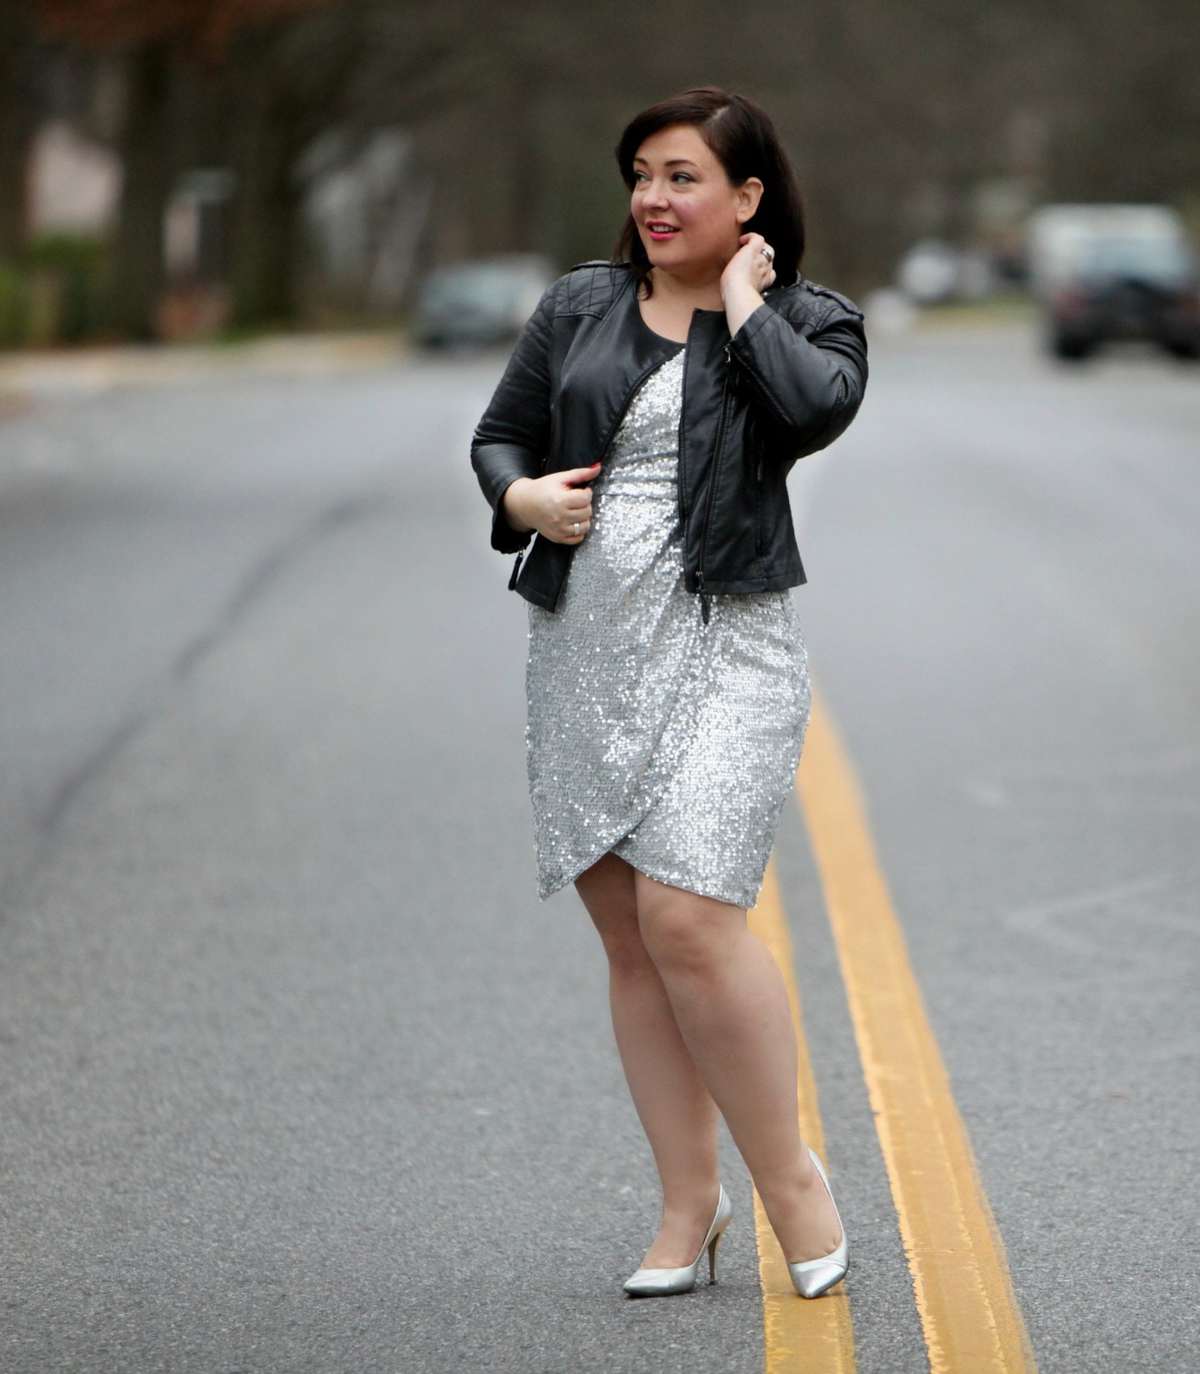 Wardrobe Oxygen, an over 40 fashion and personal style blog featuring a silver sequin cocktail dress